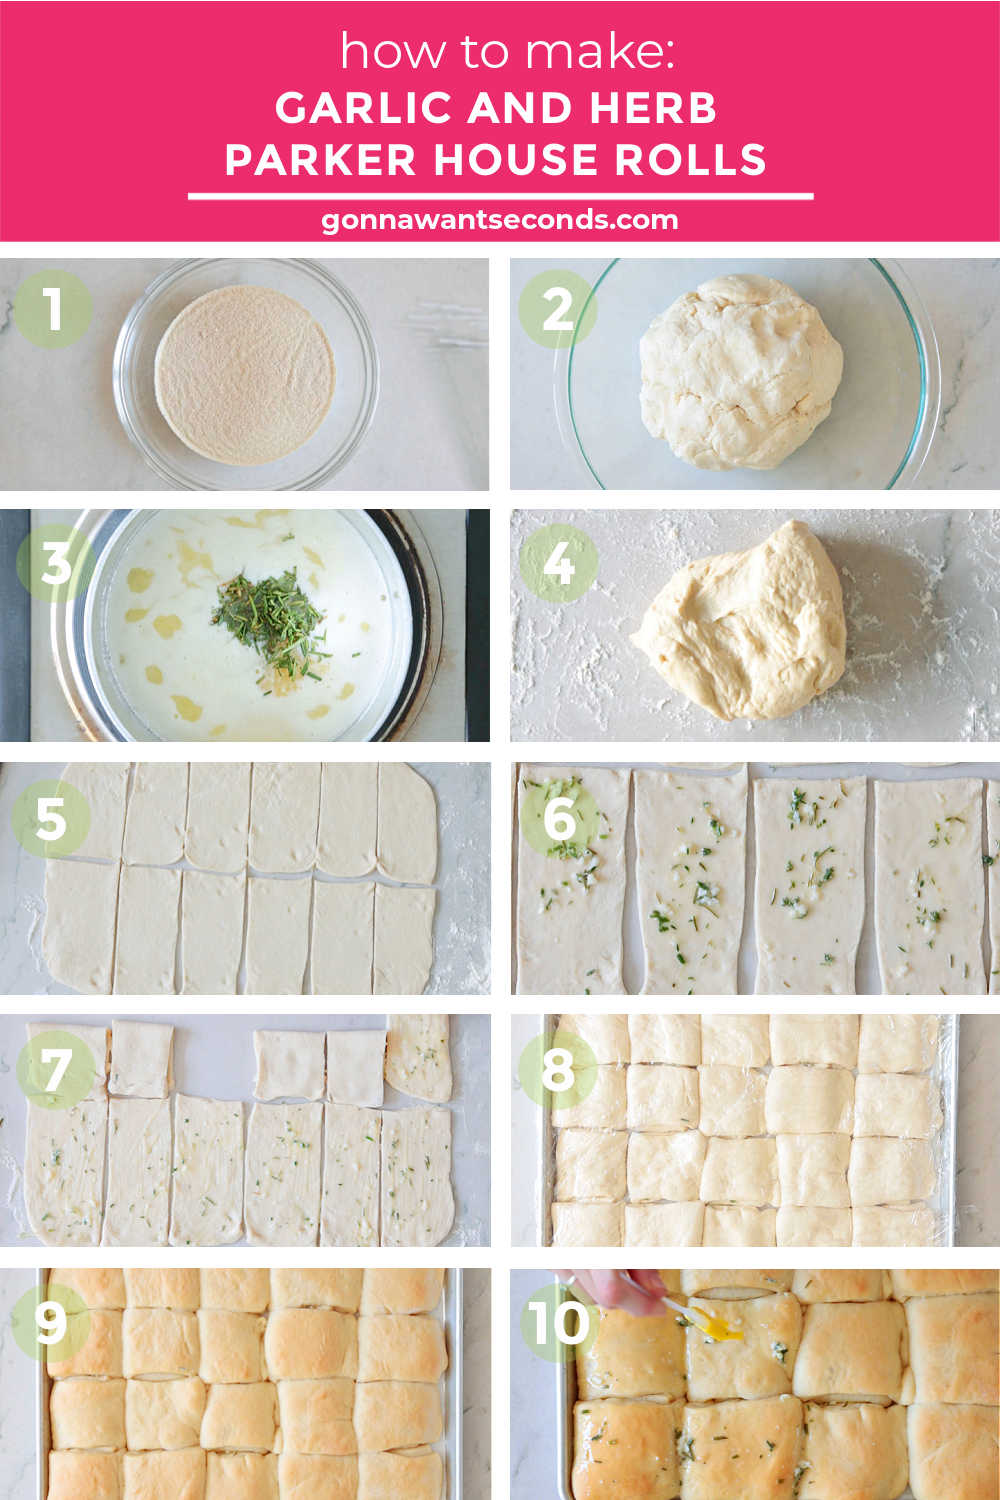 Step by step how to make Garlic and Herb Parker House Rolls